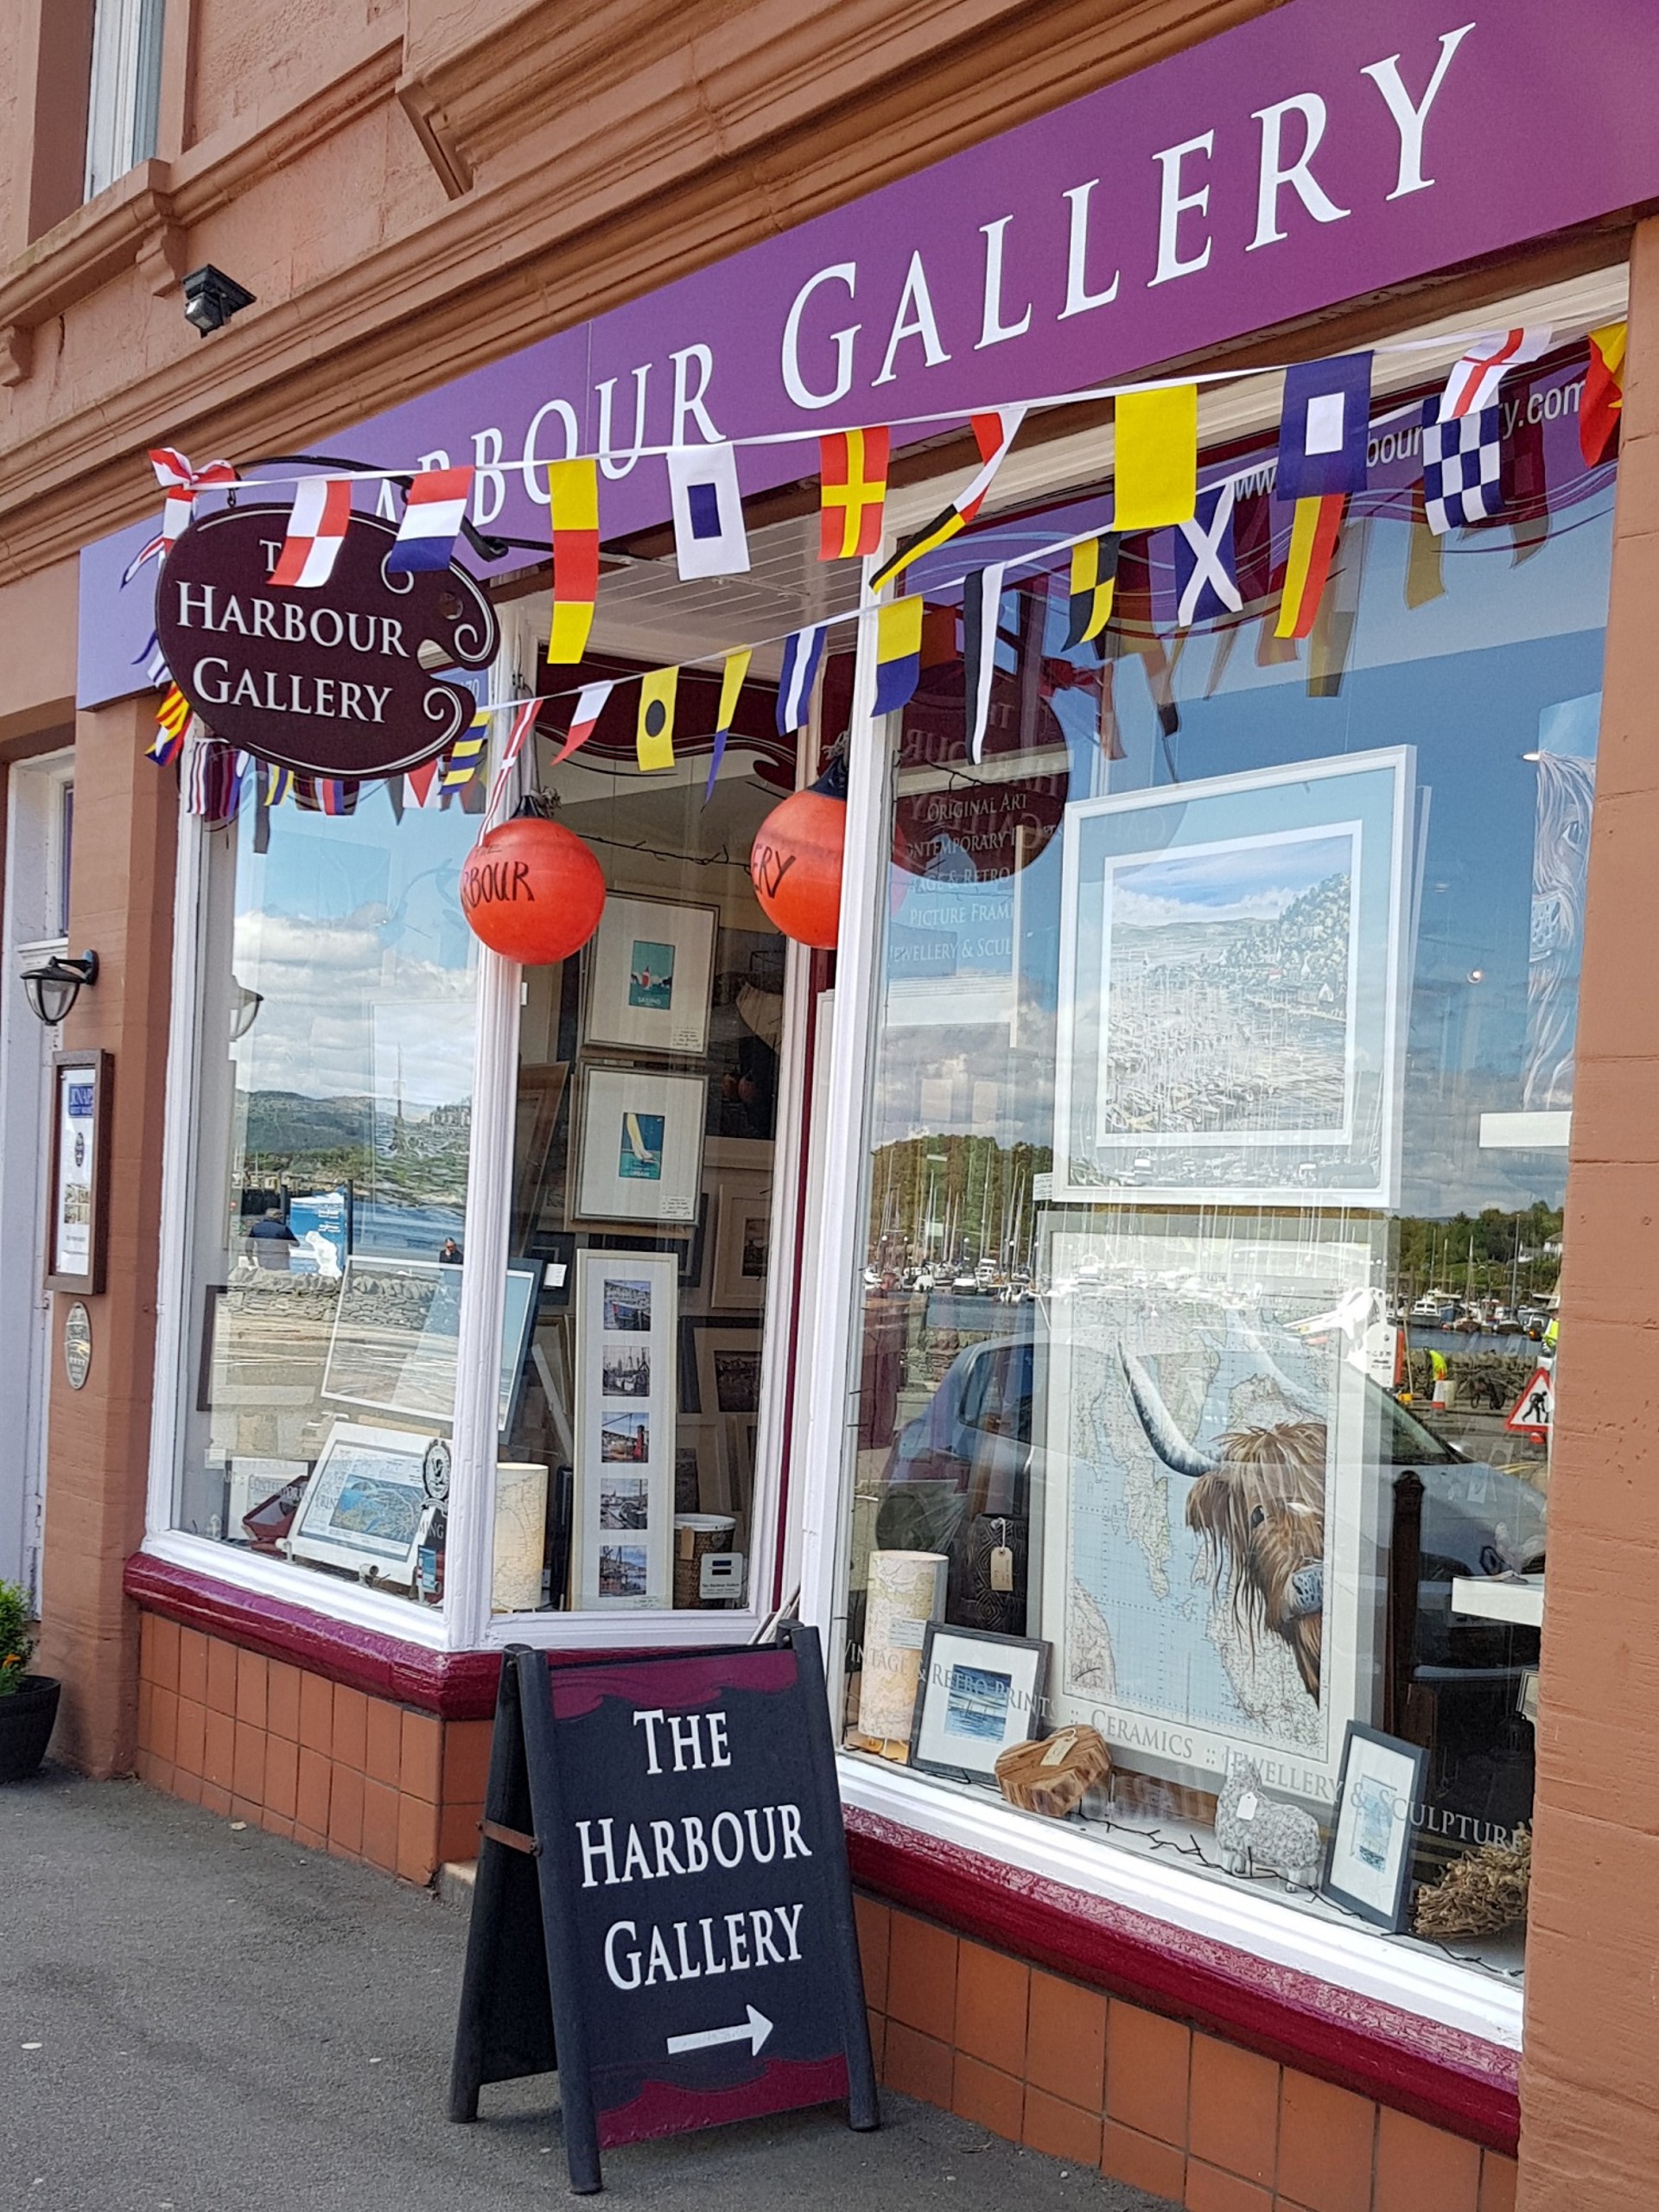 Background image - The Harbour Gallery Tarbert